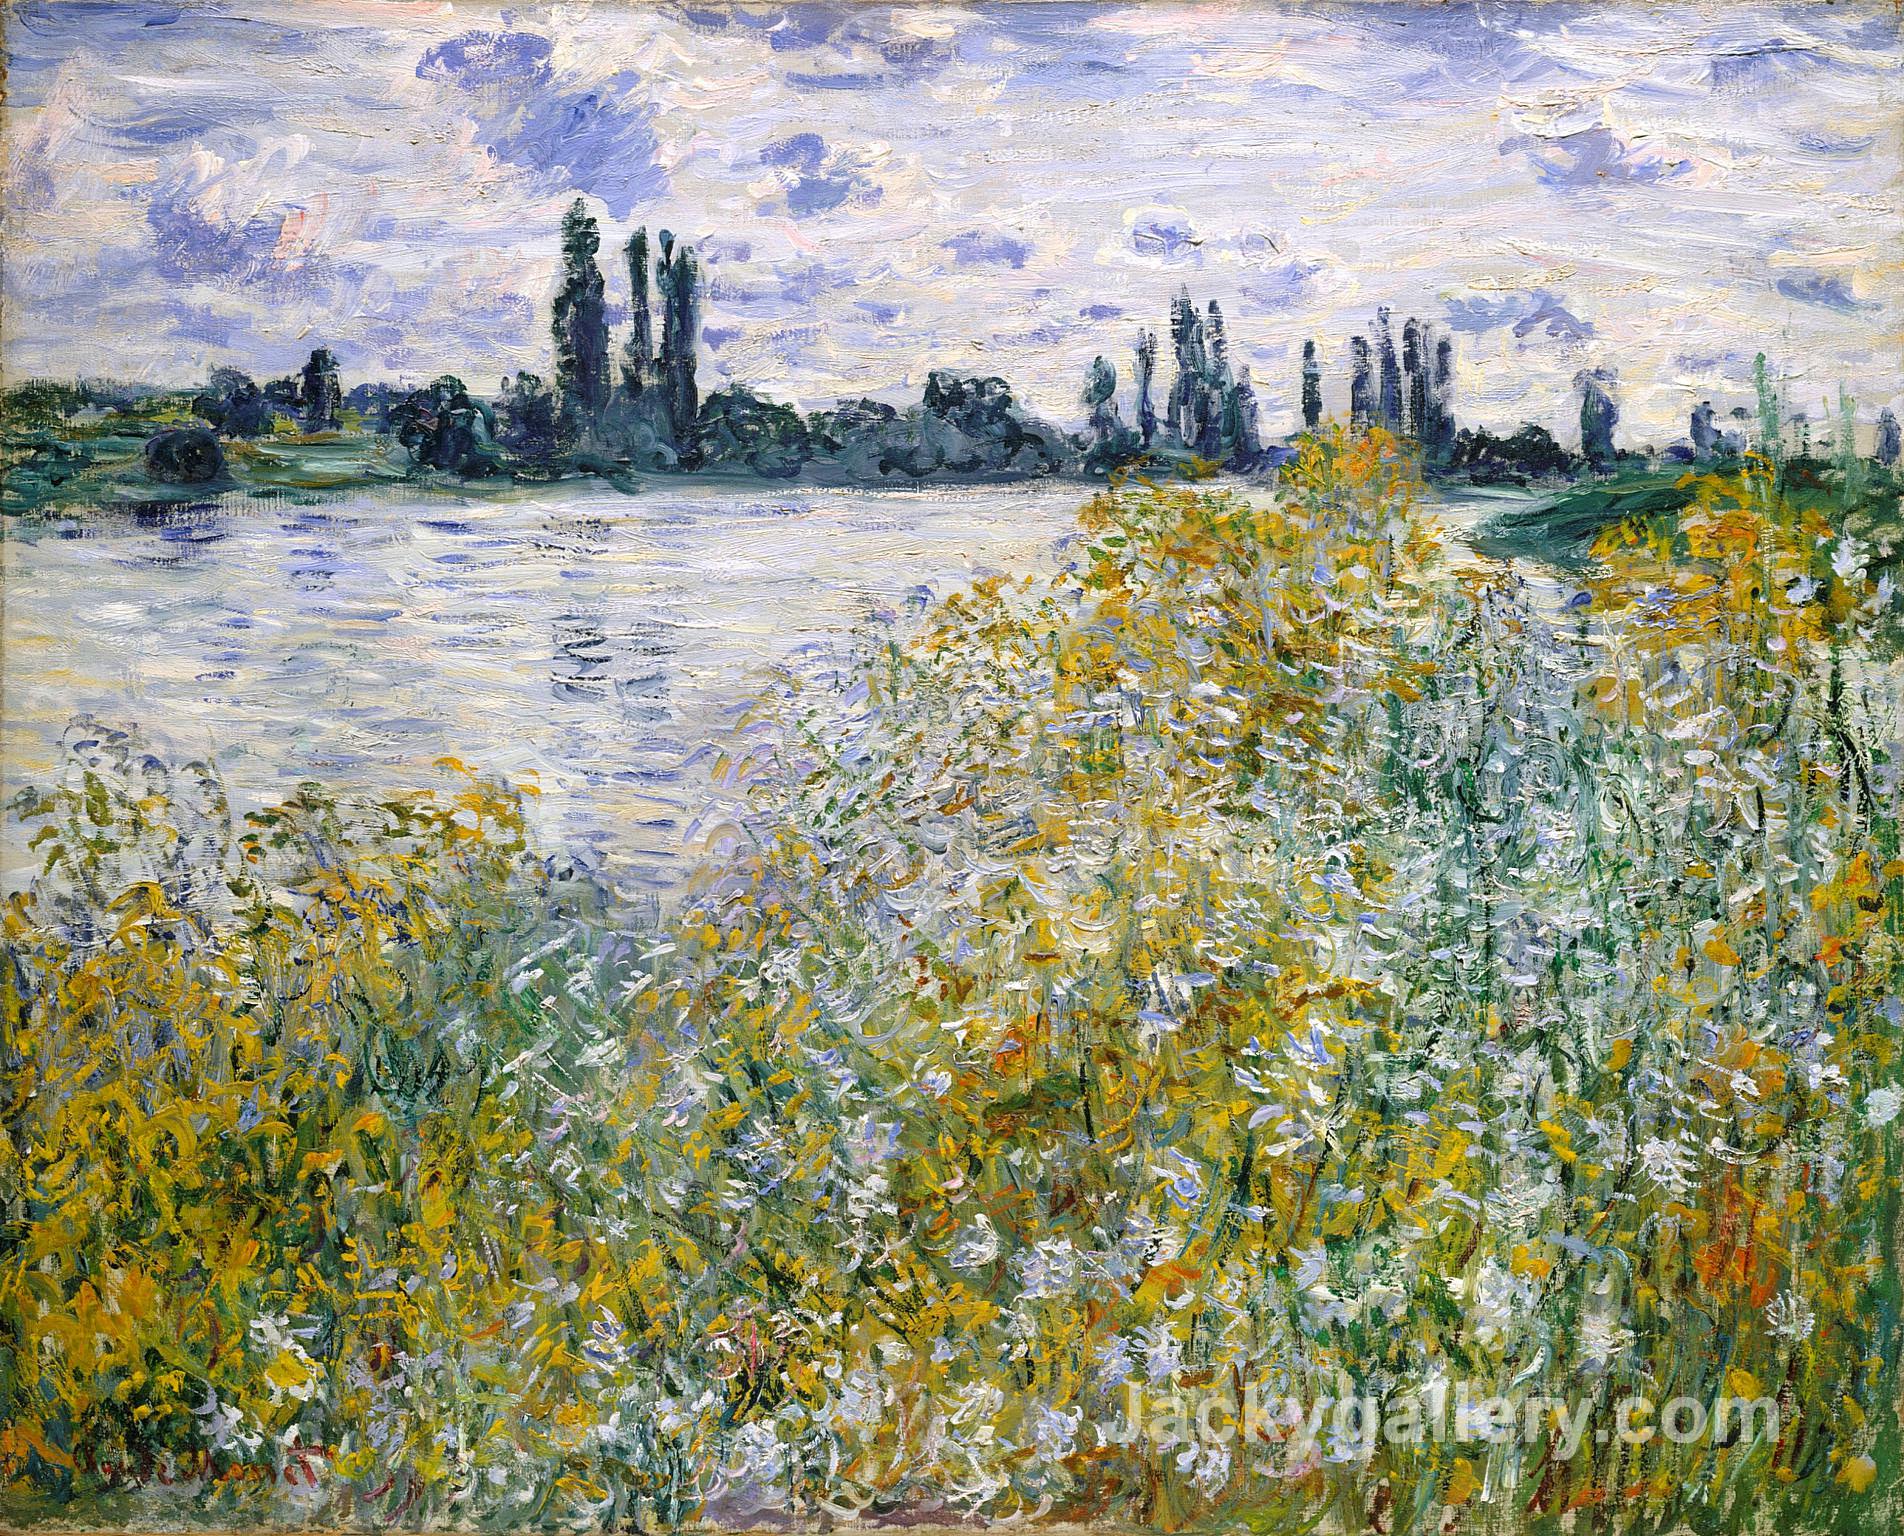 Isle of Flowers on Siene near Vetheuil by Claude Monet paintings reproduction